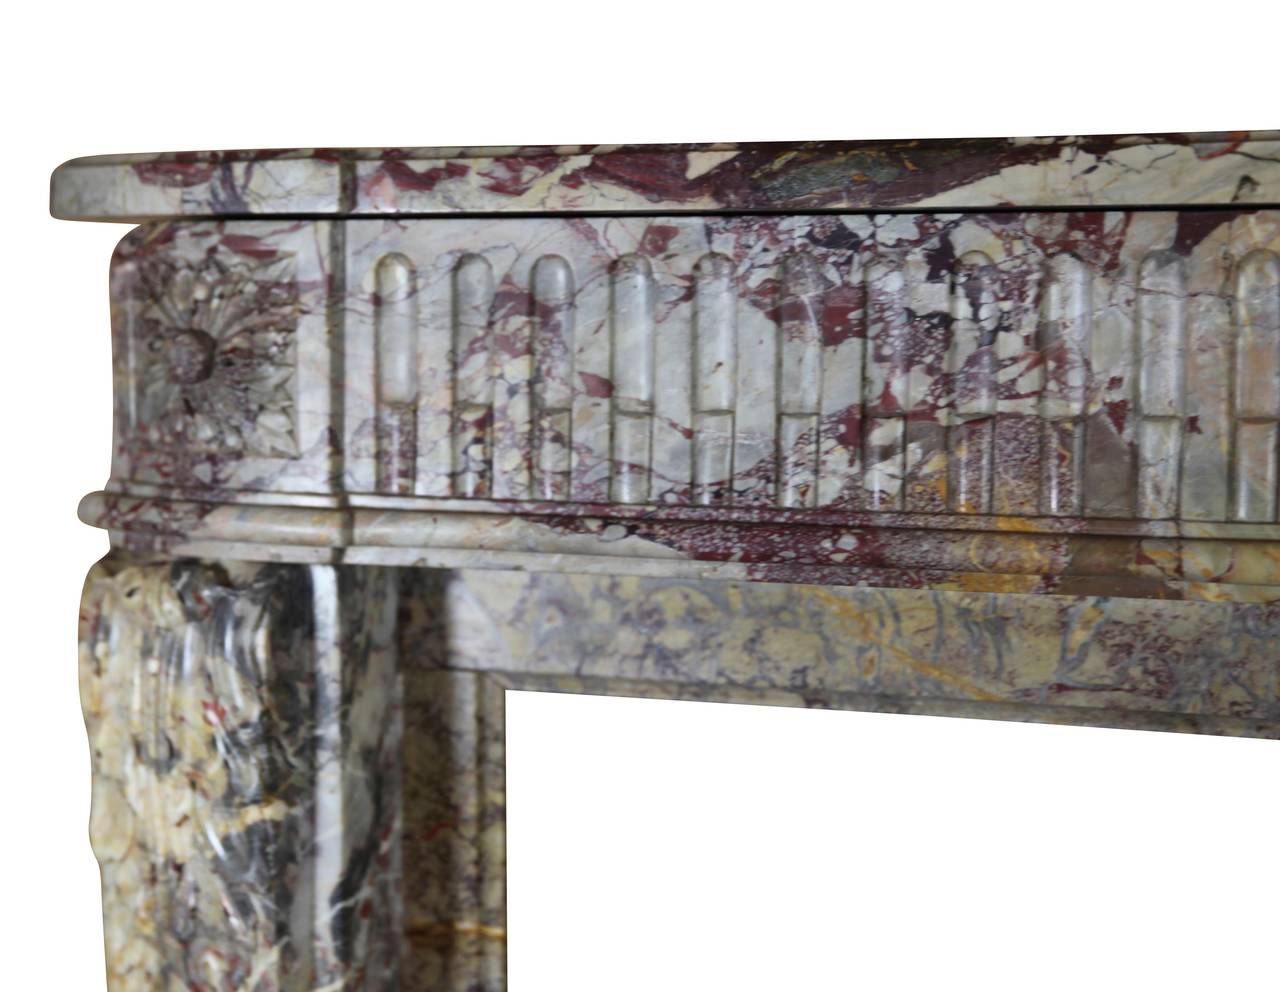 This original 18th century Royal French Saracolin marble fireplace surround is from the Louis XVI period. It has rounded corners and an exceptionally rich and brilliant color combination. The mantel is in perfect condition. It is stunning and